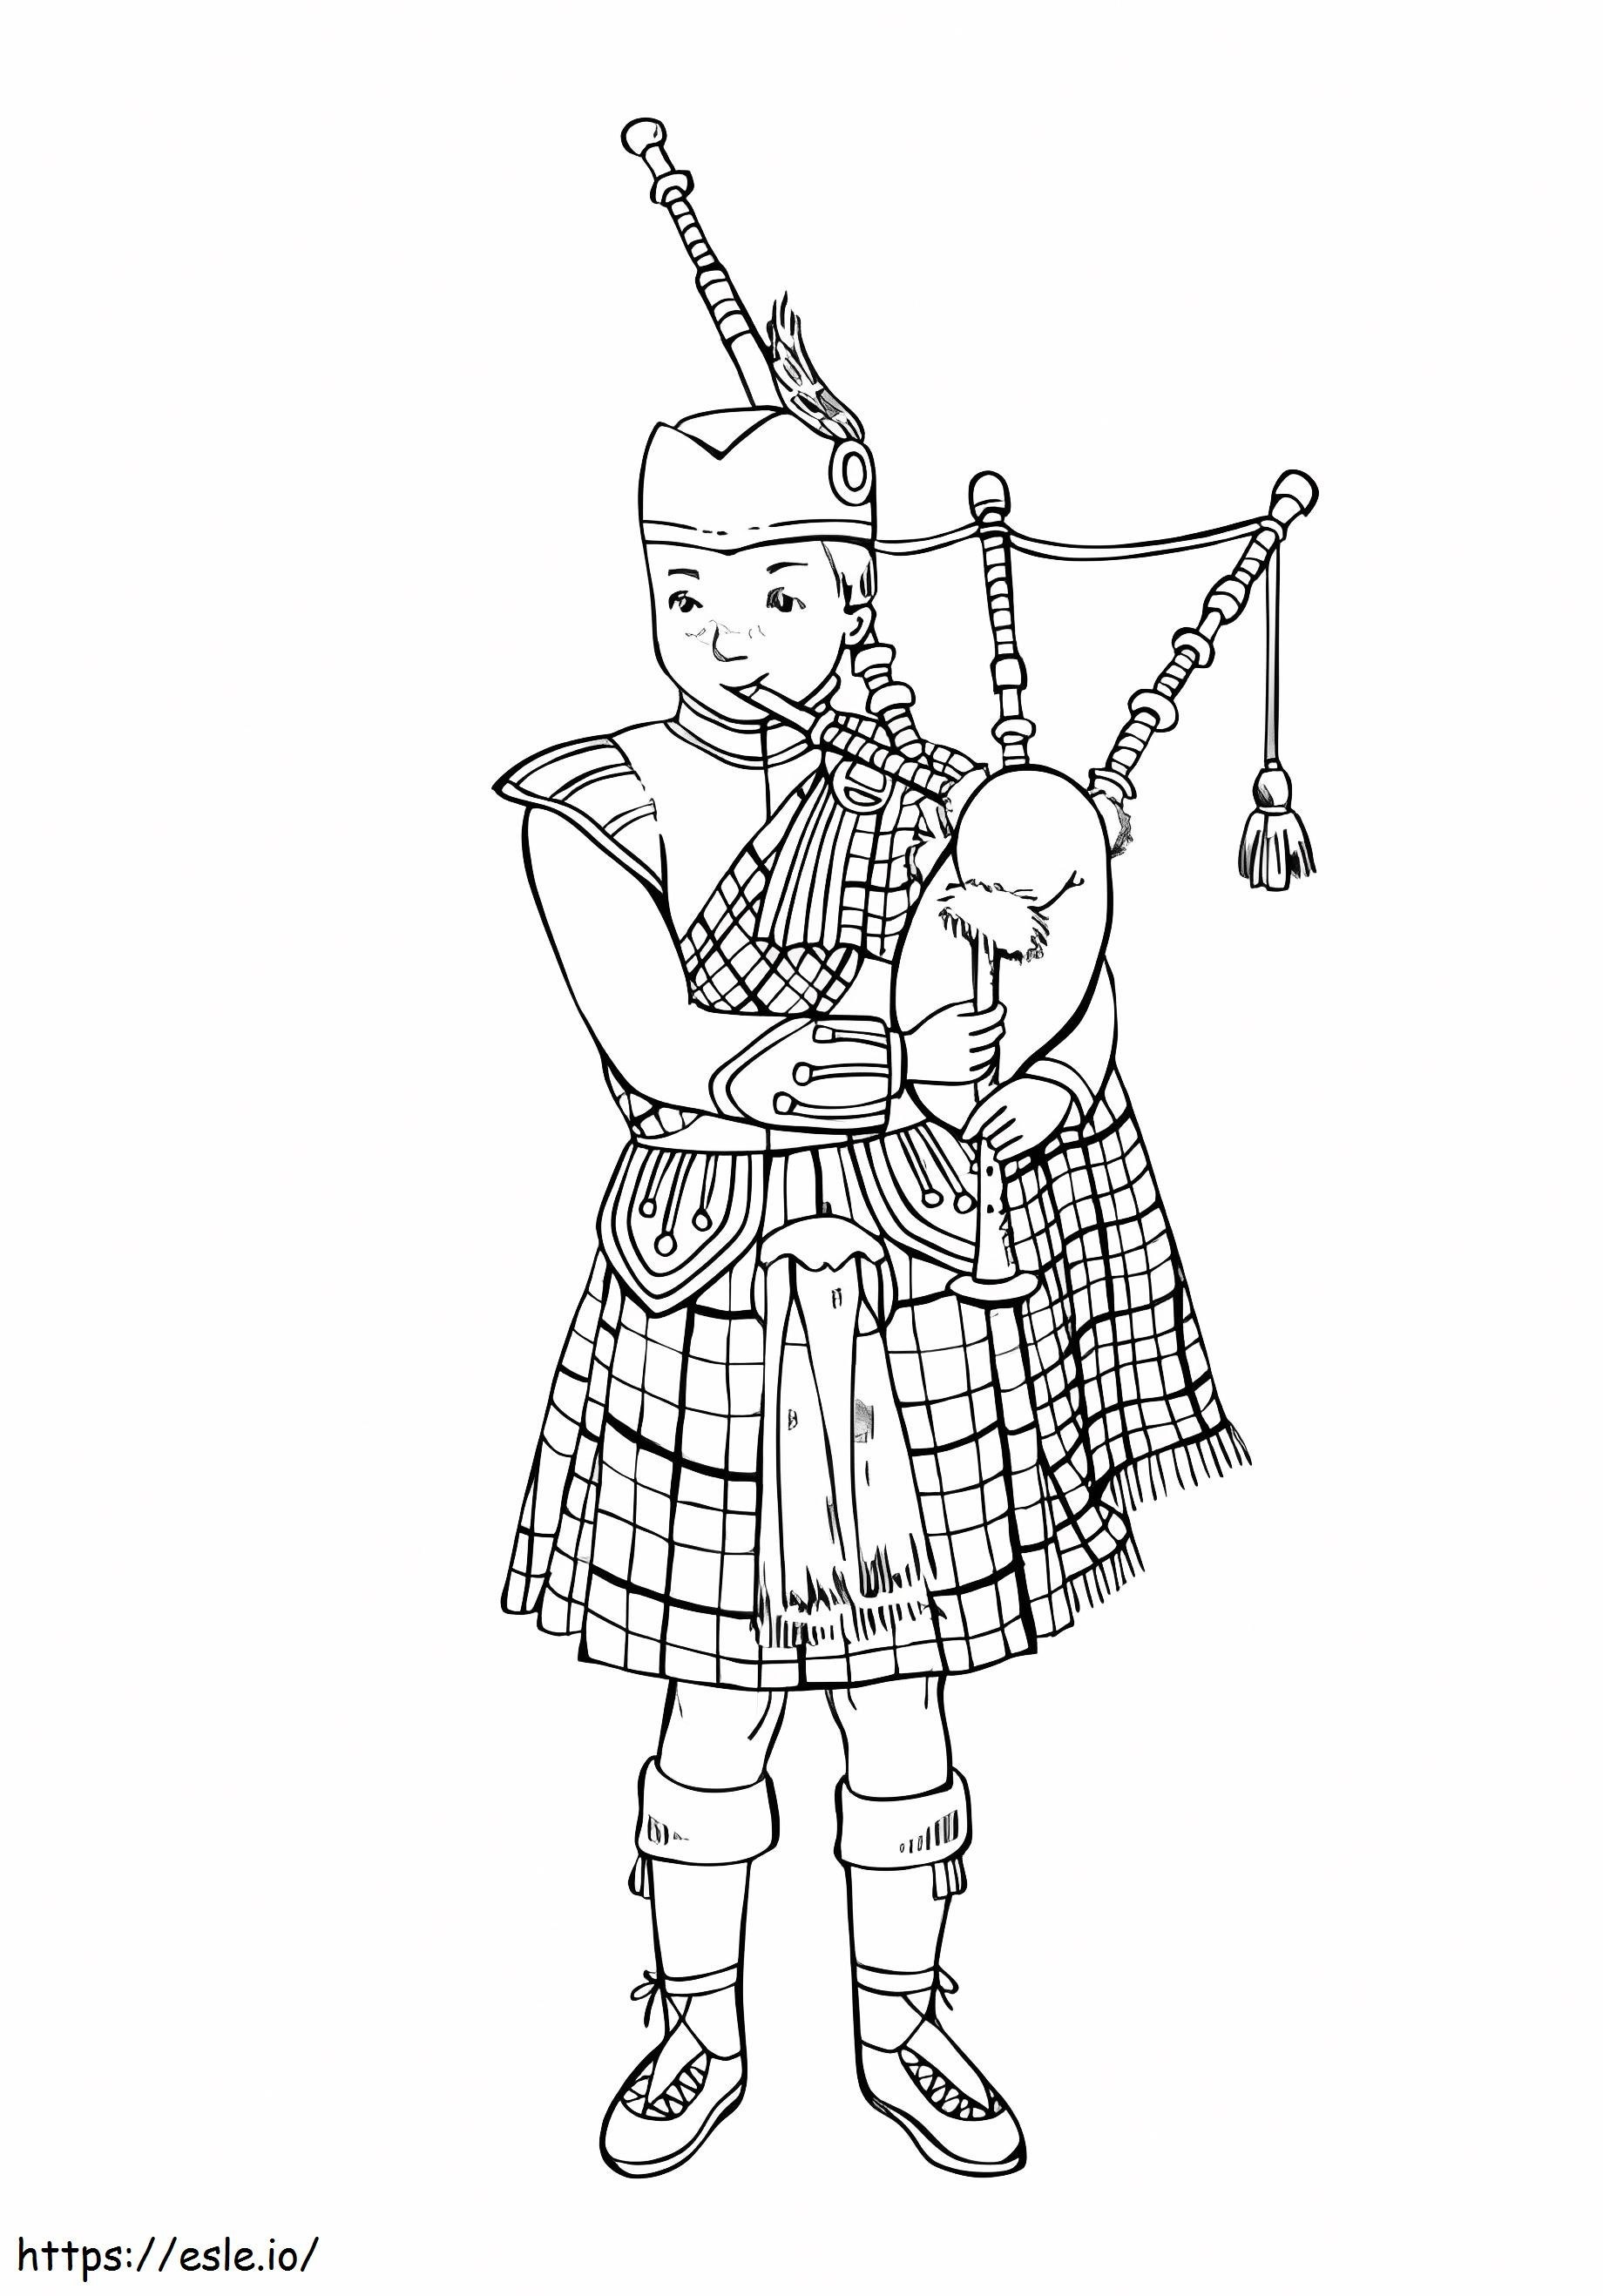 Scottish coloring page